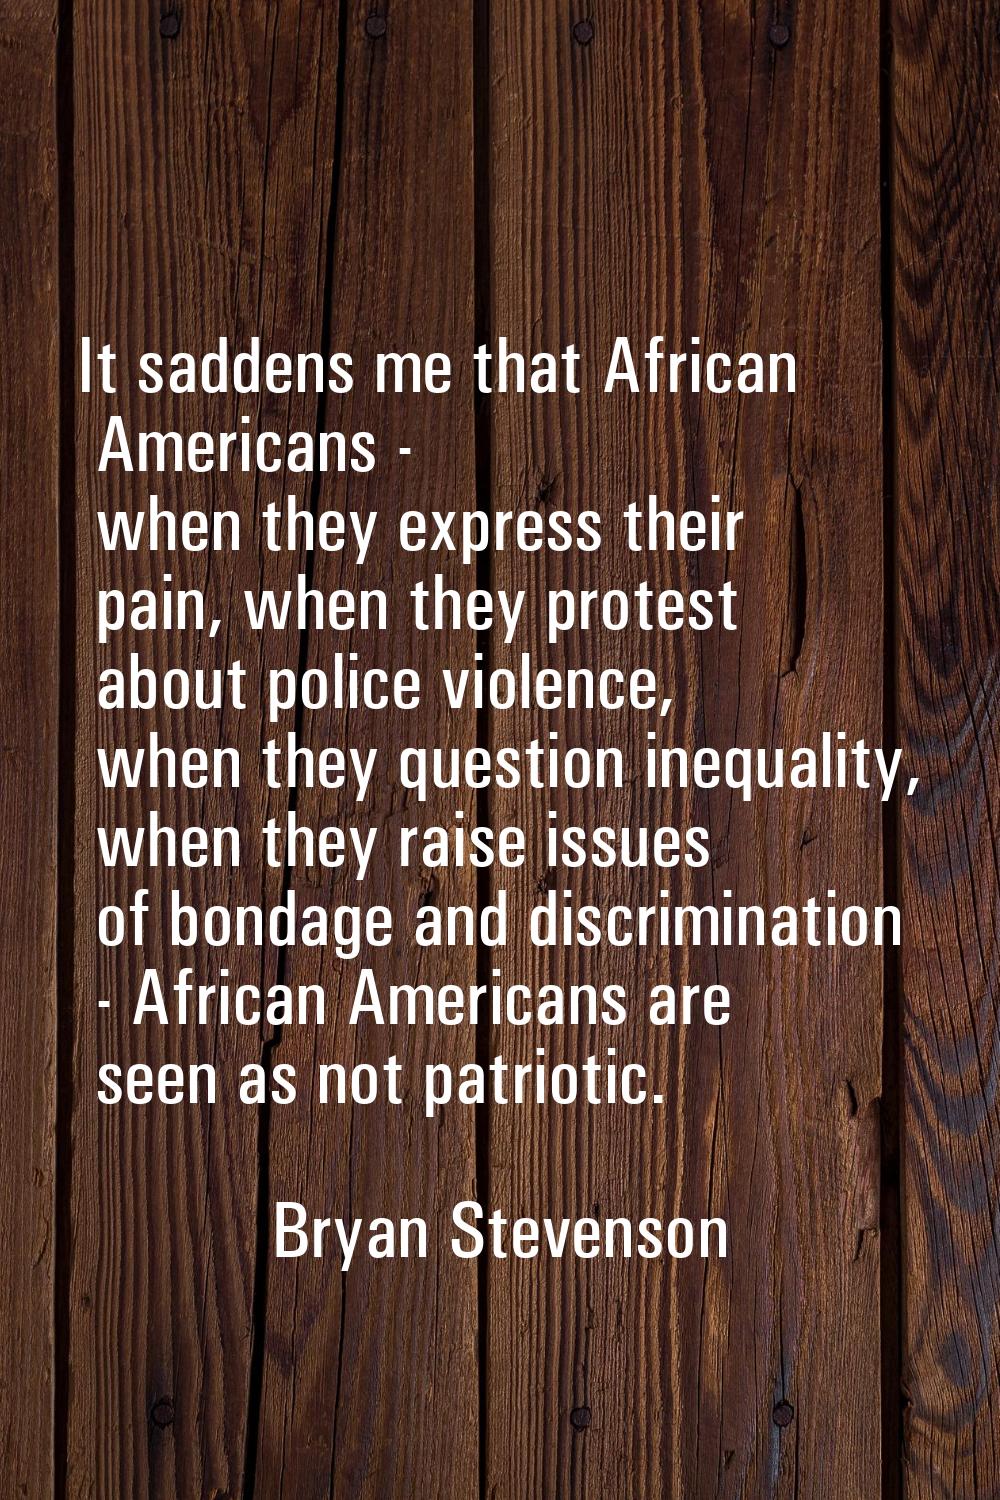 It saddens me that African Americans - when they express their pain, when they protest about police